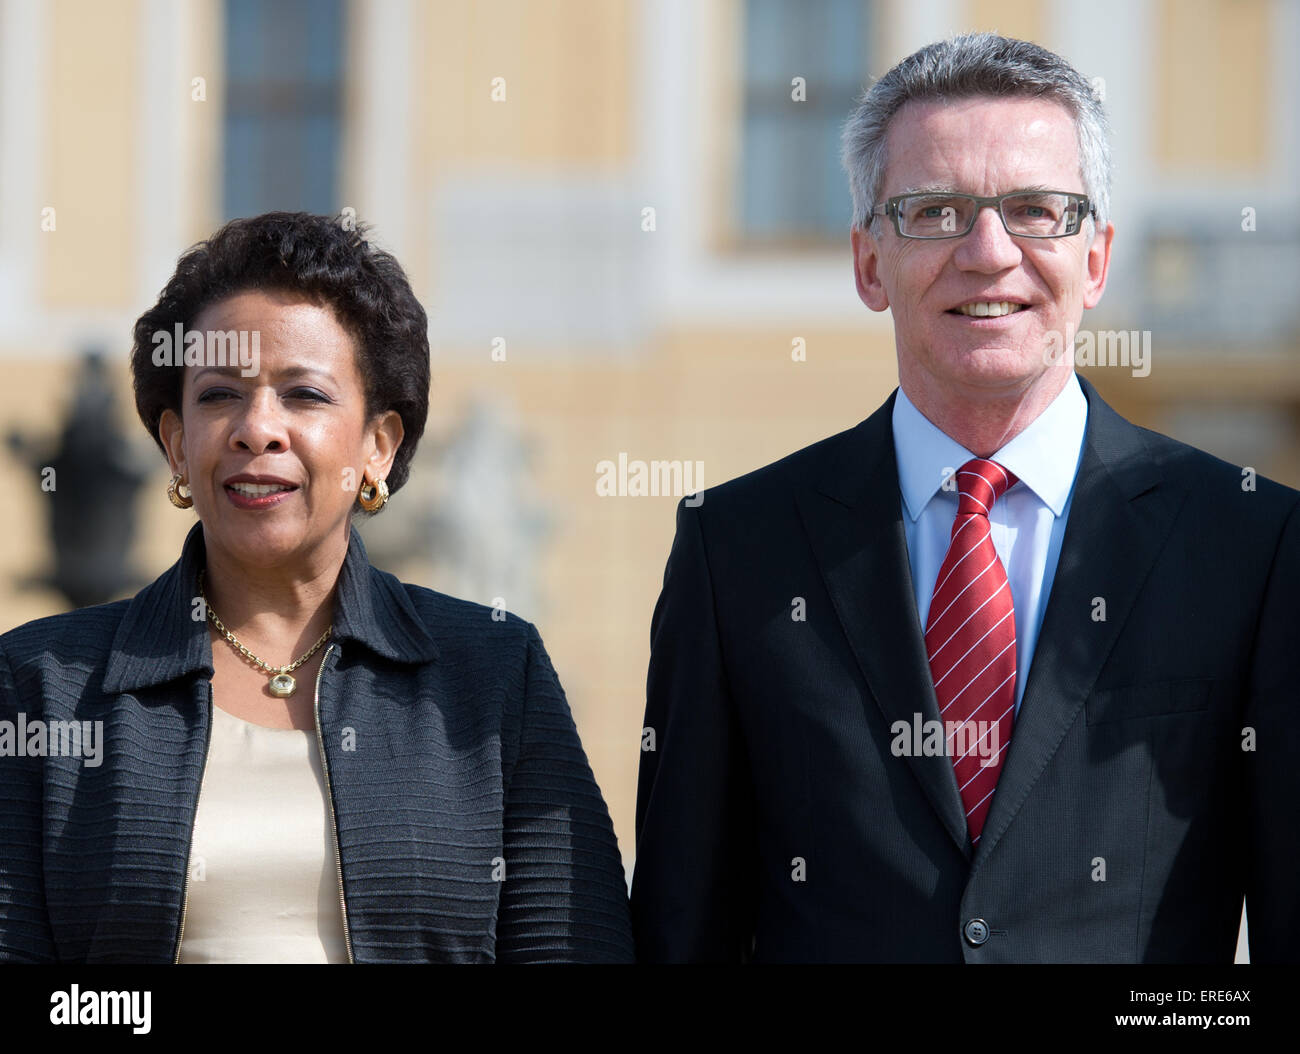 Moritzburg, Germany. 2nd June, 2015. German Interior Minister Thomas de Maiziere and US Attorney General Loretta Lynch meet for a 'family photo' in the context the G6 Meeting of Interior Ministers at Moritzburg Castle in Moritzburg, Germany, 02 June 2015. The German Interior Minister de Maiziere meets with his counterparts from France, Italy, Poland, Spain, and the UK (G6), as well as the EU Commissioner, on 01 and 02 June for political briefing at the Castle near Dresen. Credit:  dpa picture alliance/Alamy Live News Stock Photo